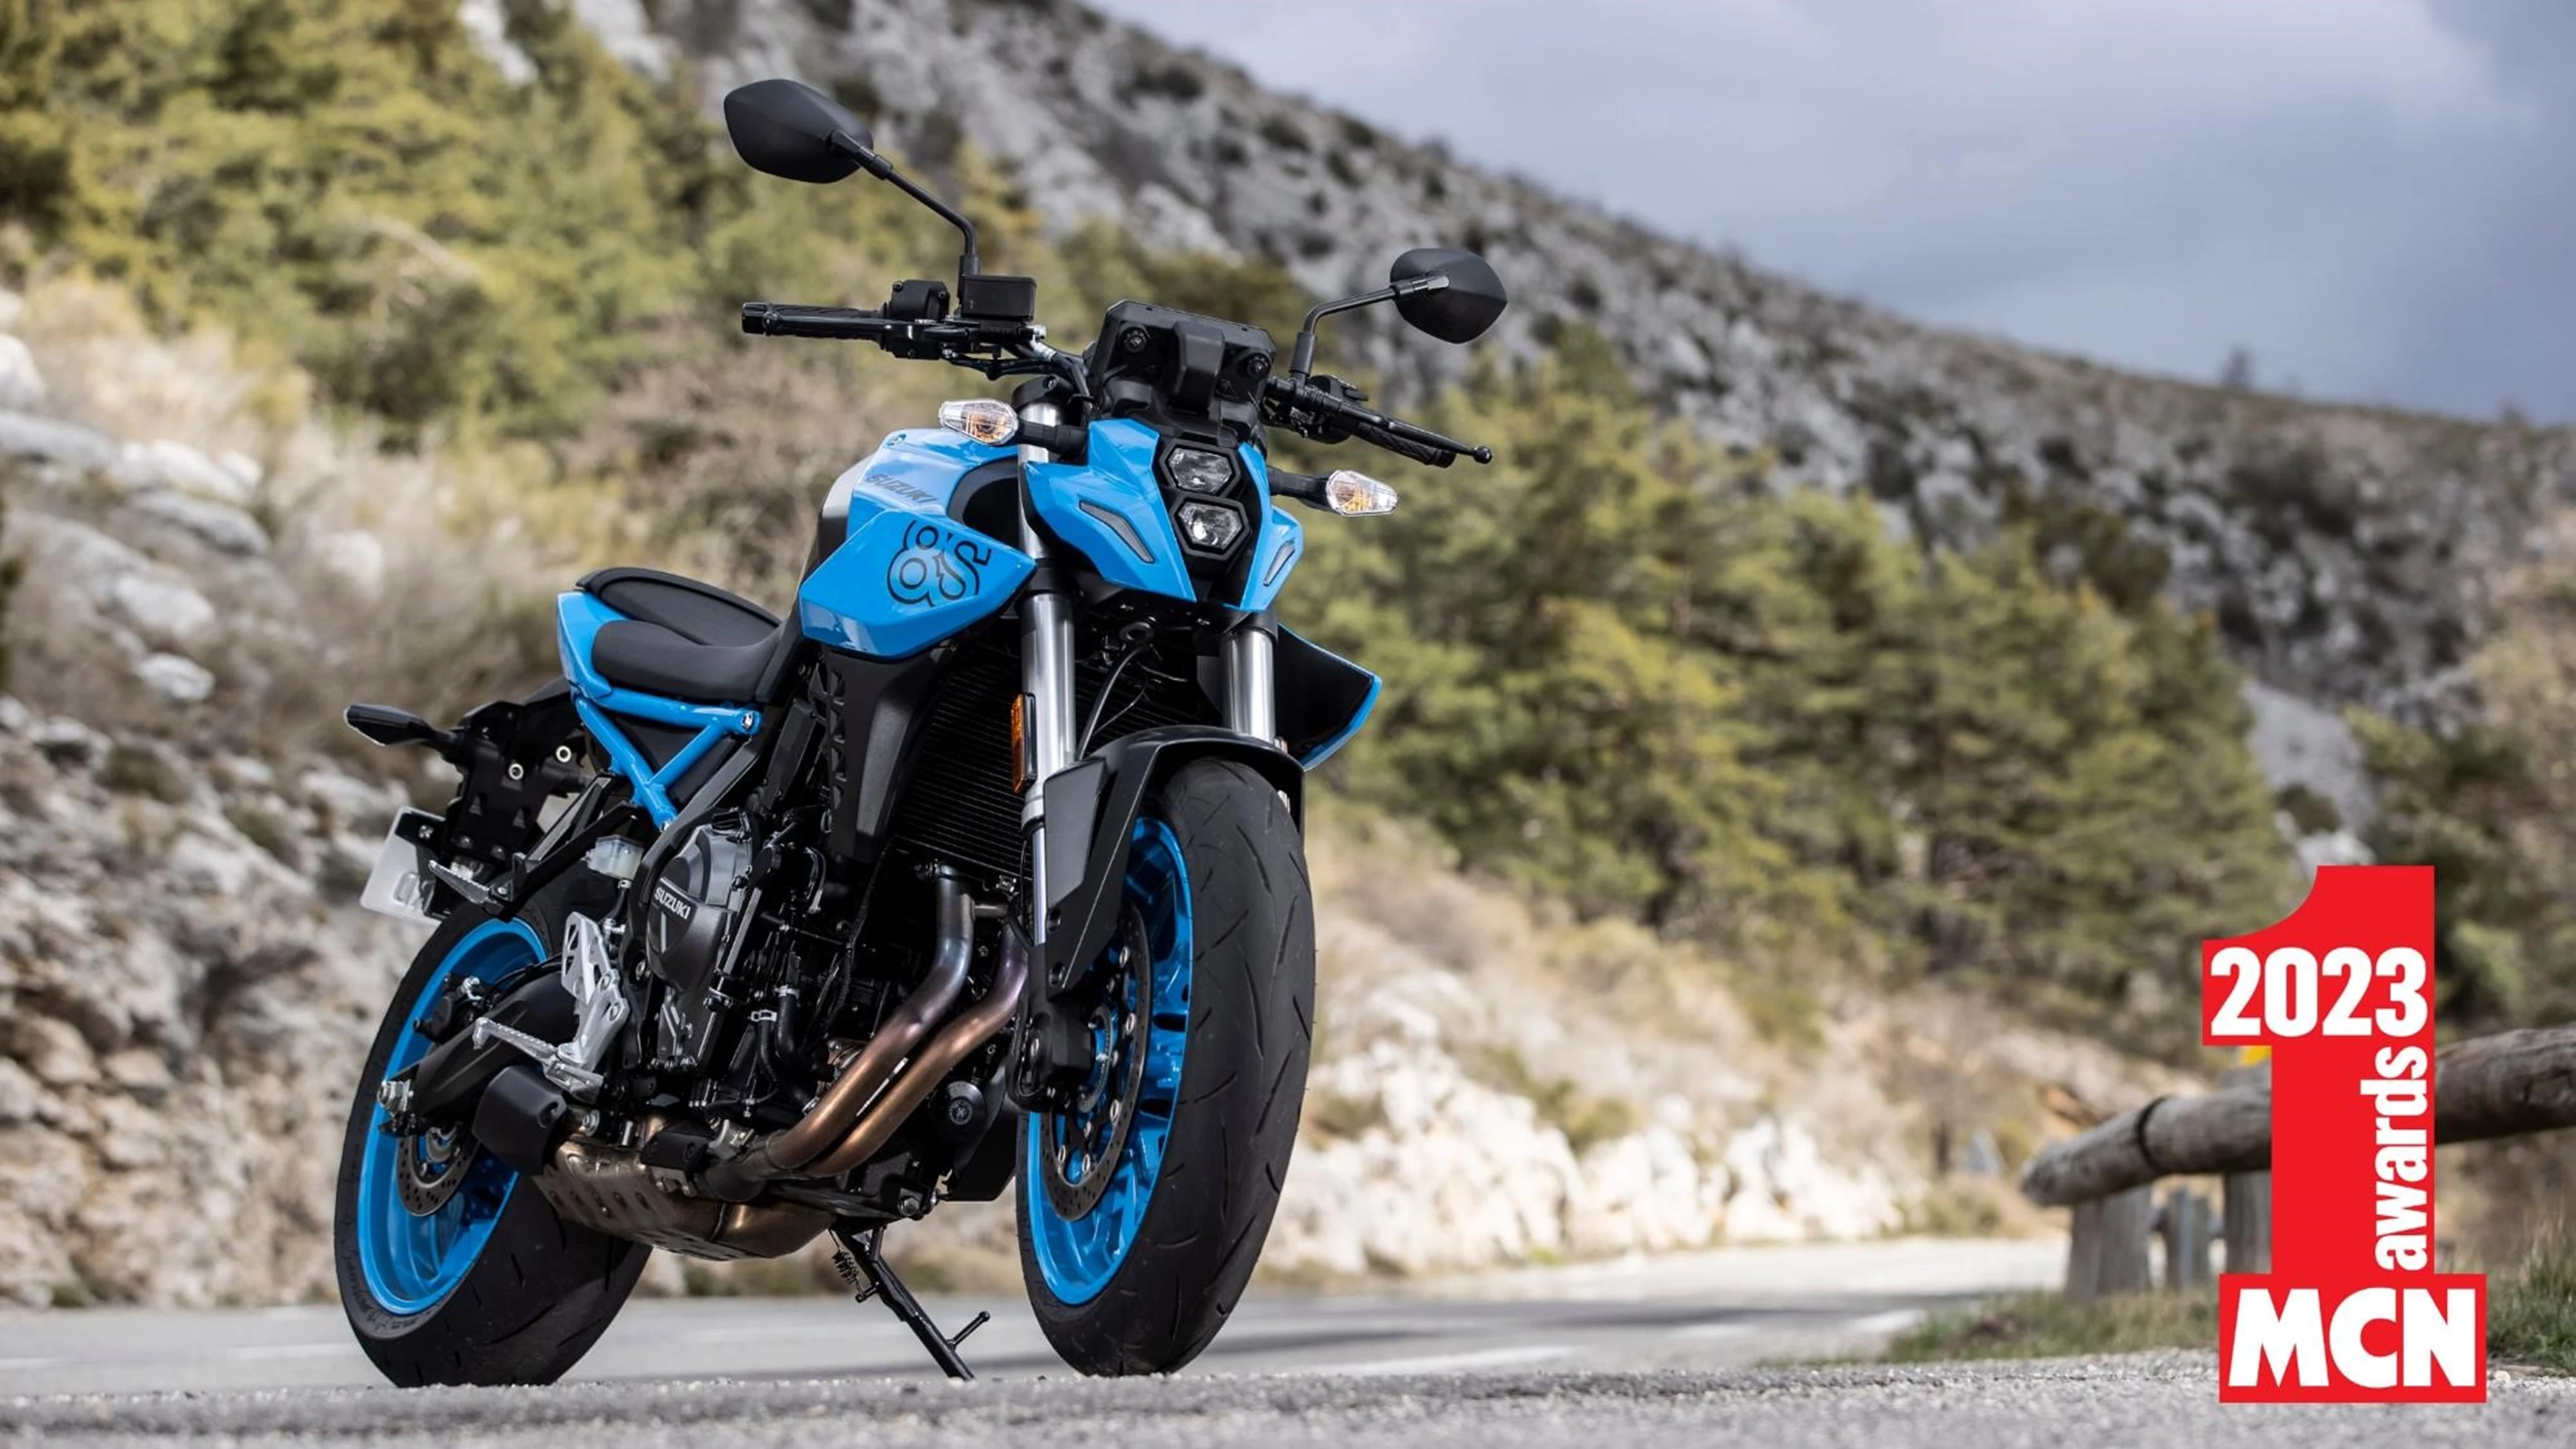 Suzuki GSX-8S naked motorcycle in the mountains